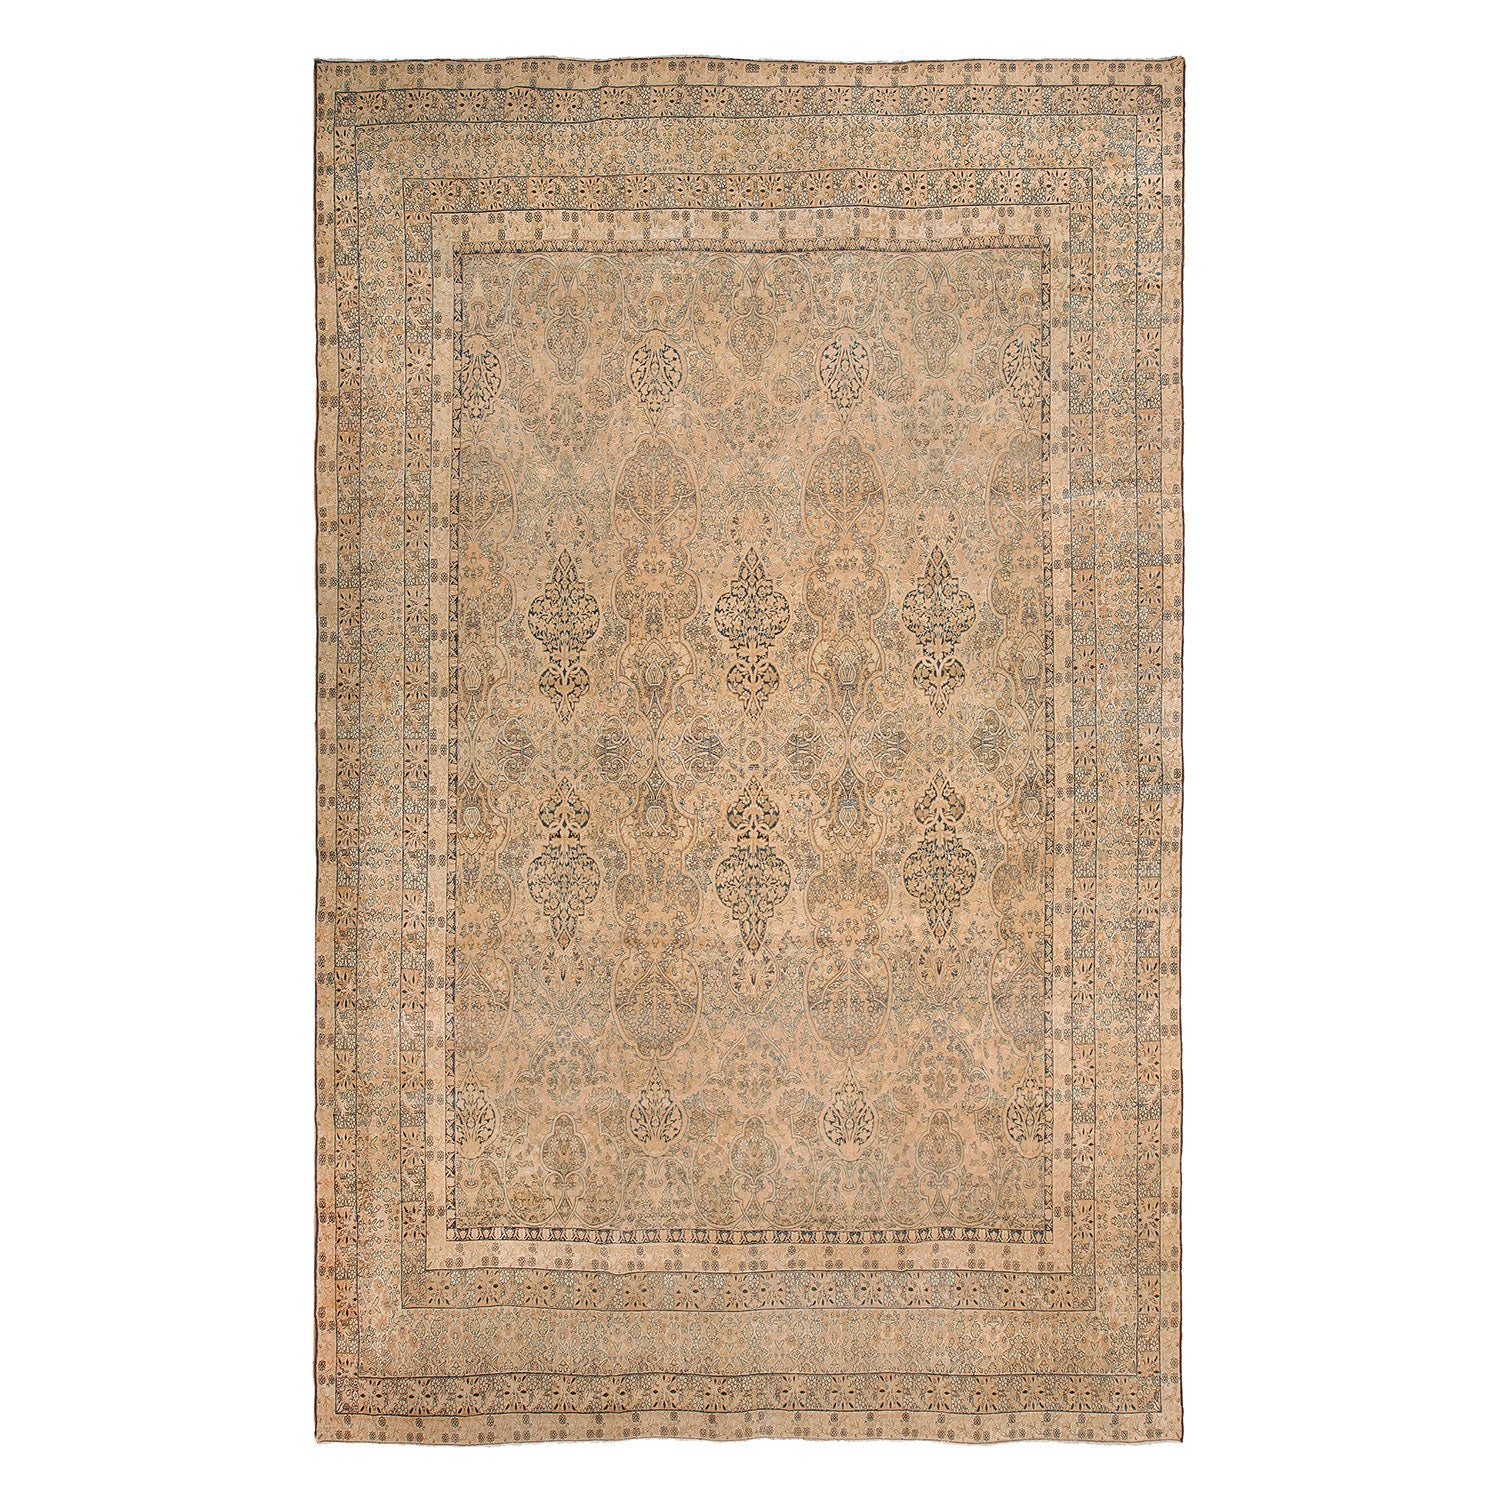 Ornate rectangular area rug with intricate floral and paisley-like pattern